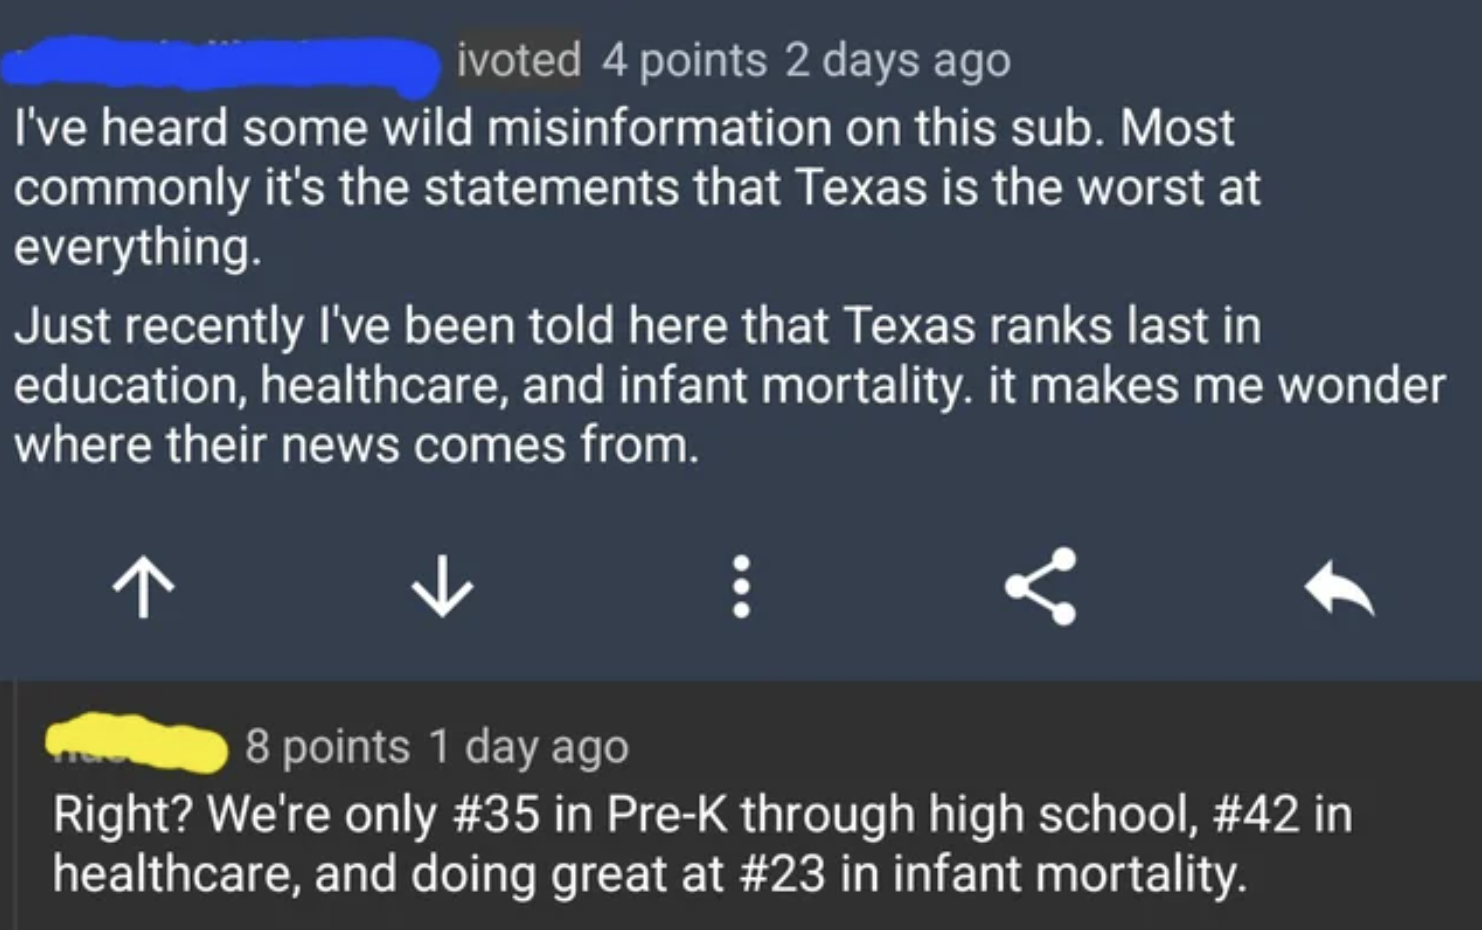 Murdered by Words - days ago I've heard some wild misinformation on this sub. Most commonly it's the statements that Texas is the worst at everything. Just recently I've been told here that Texas ranks last in education, healthcare, and infant mortality.